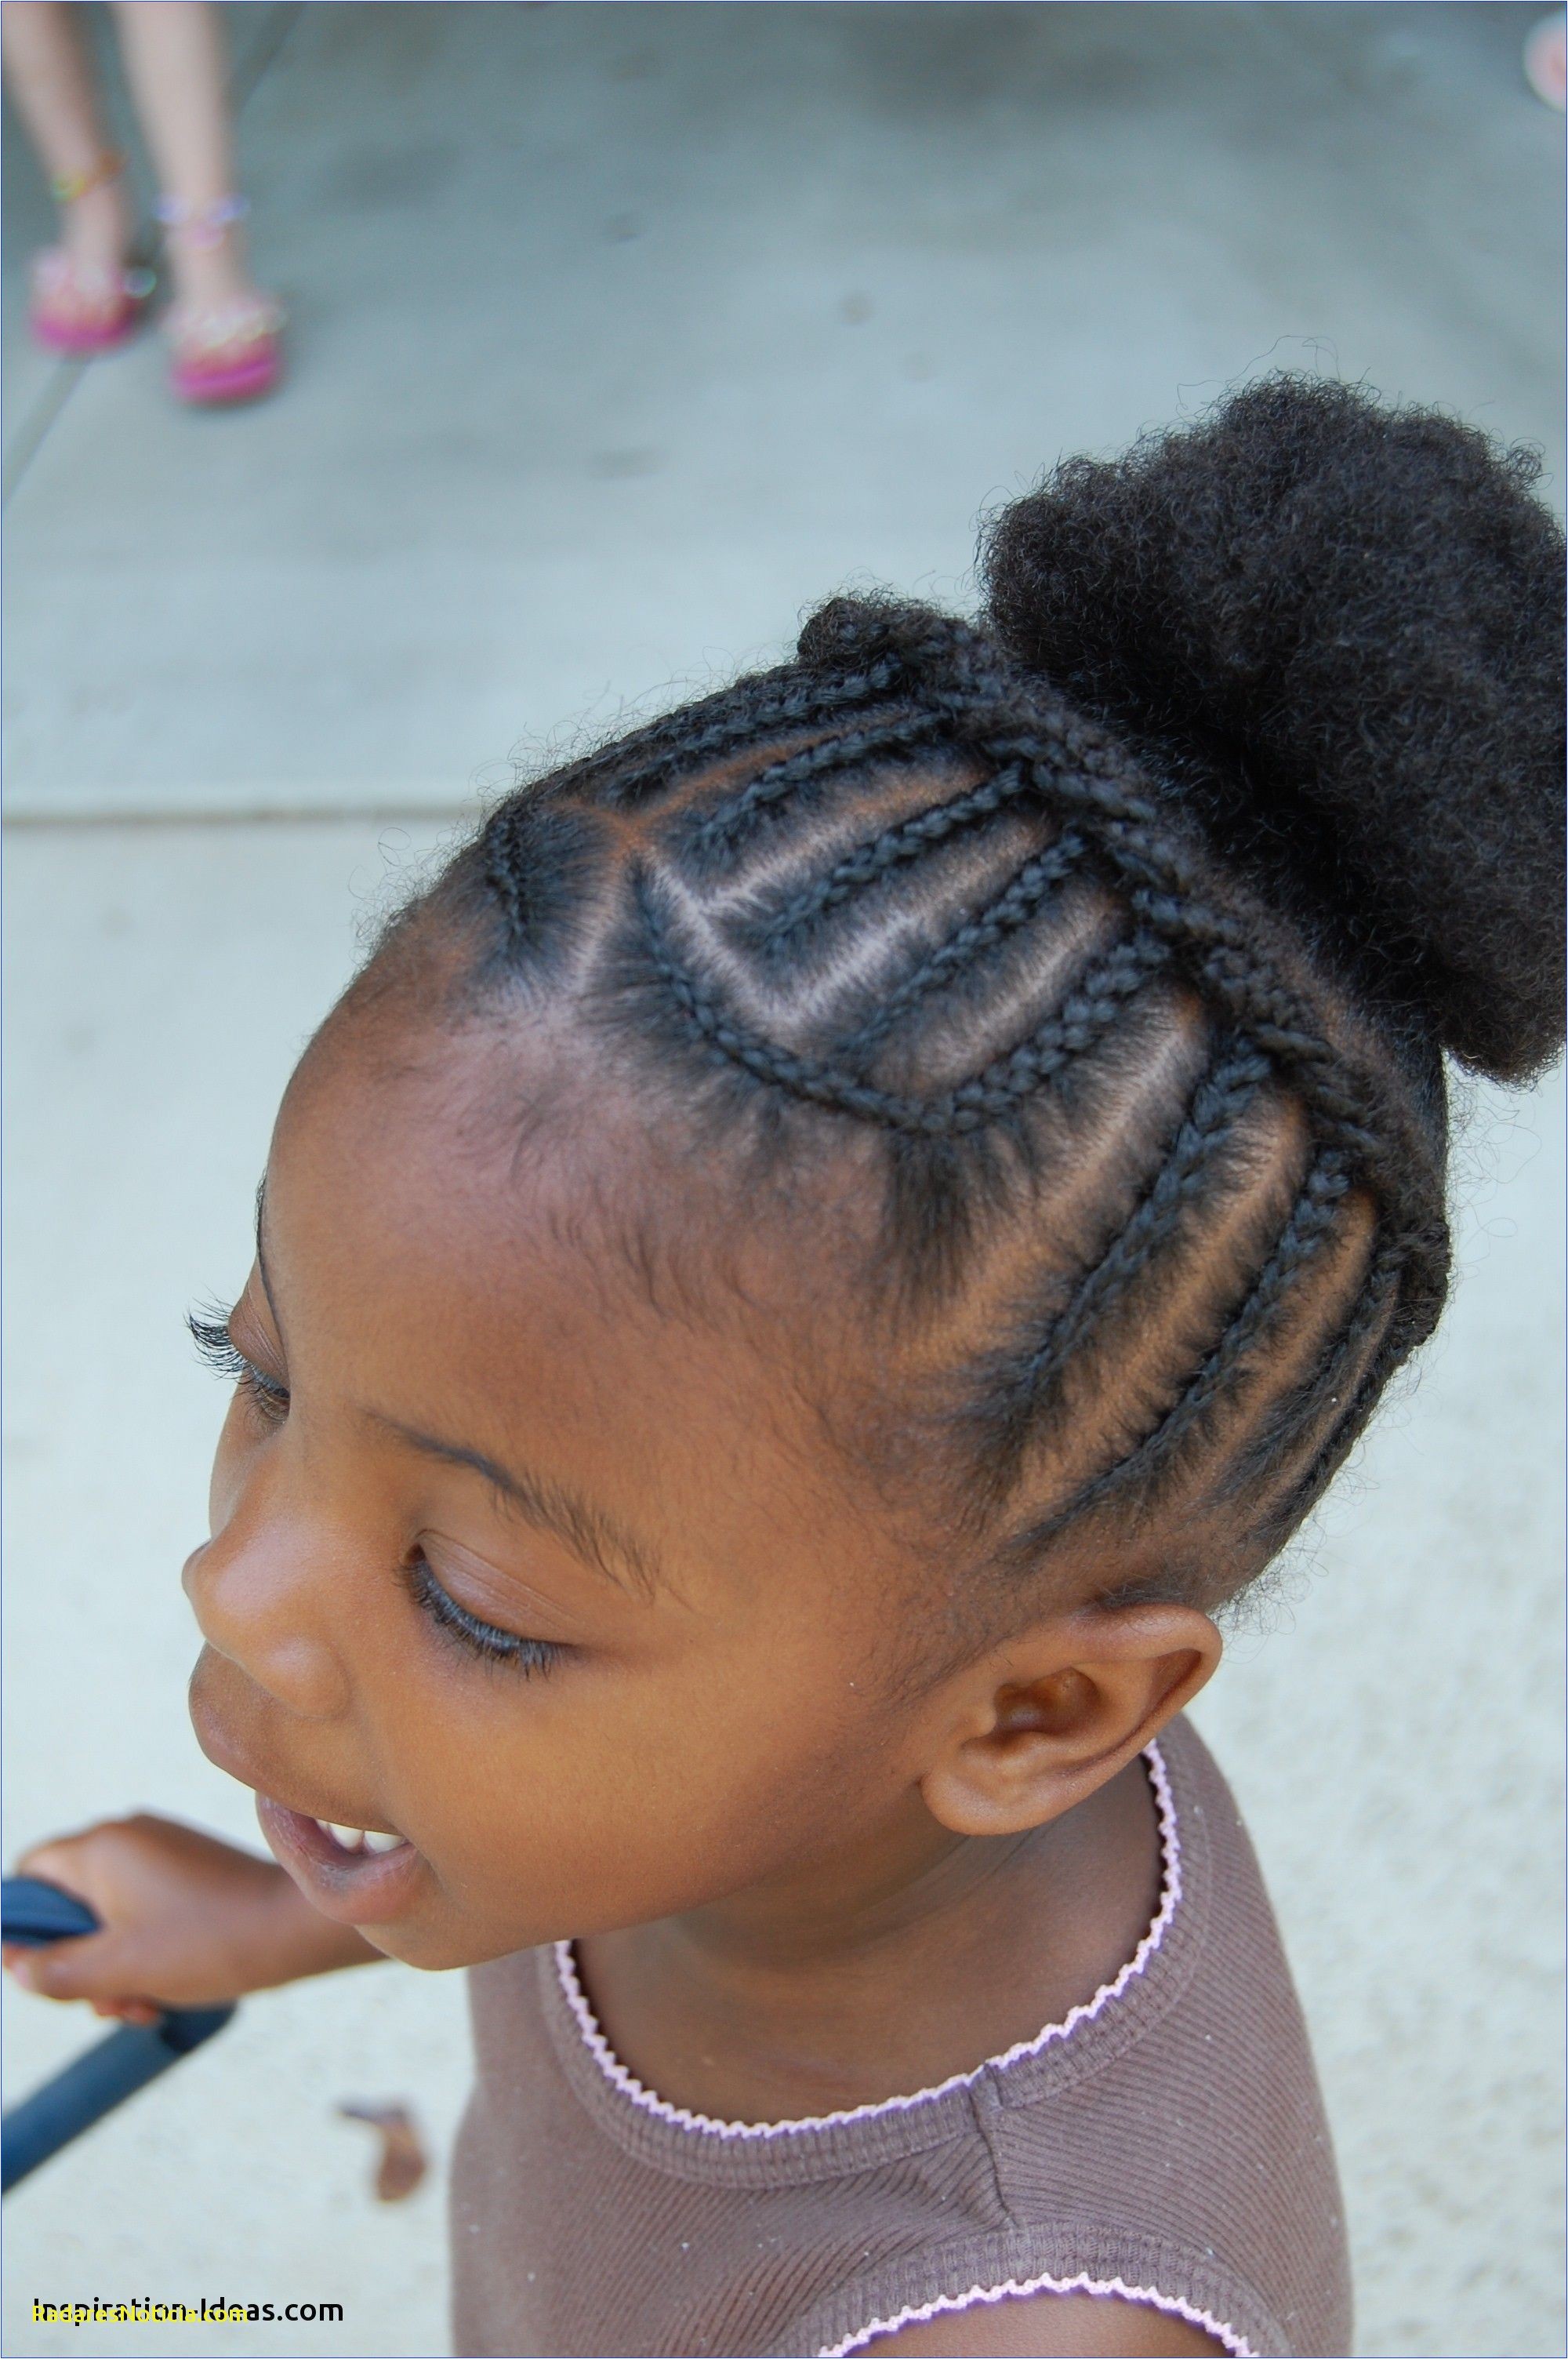 Girl Fresh Columbus 12 Hairstyle for 12 Year Olds Unique Cornrow Hairstyles for 12 Year Olds